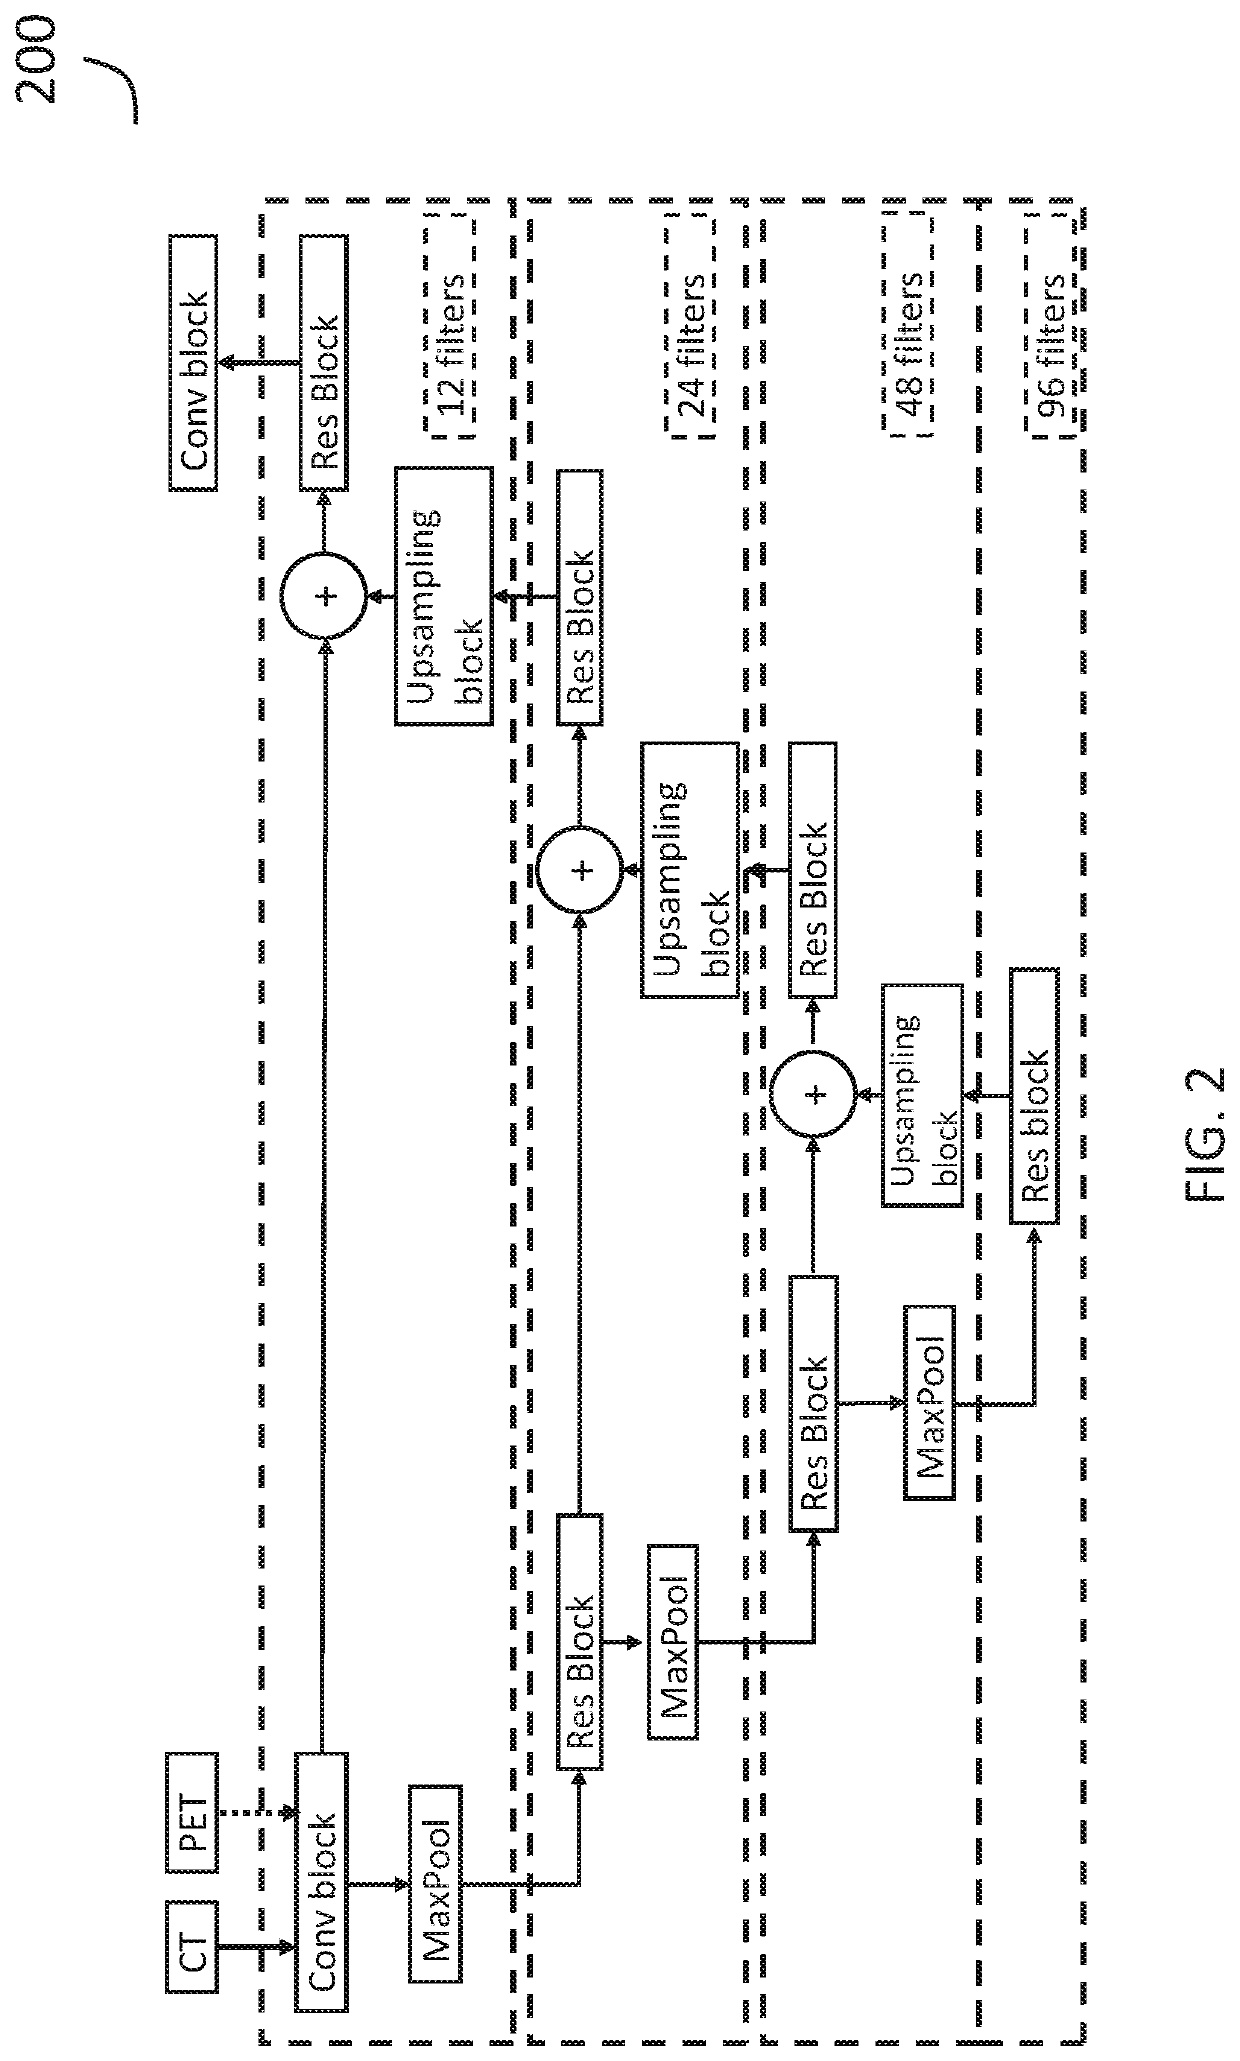 Systems and methods for deep-learning-based segmentation of composite images